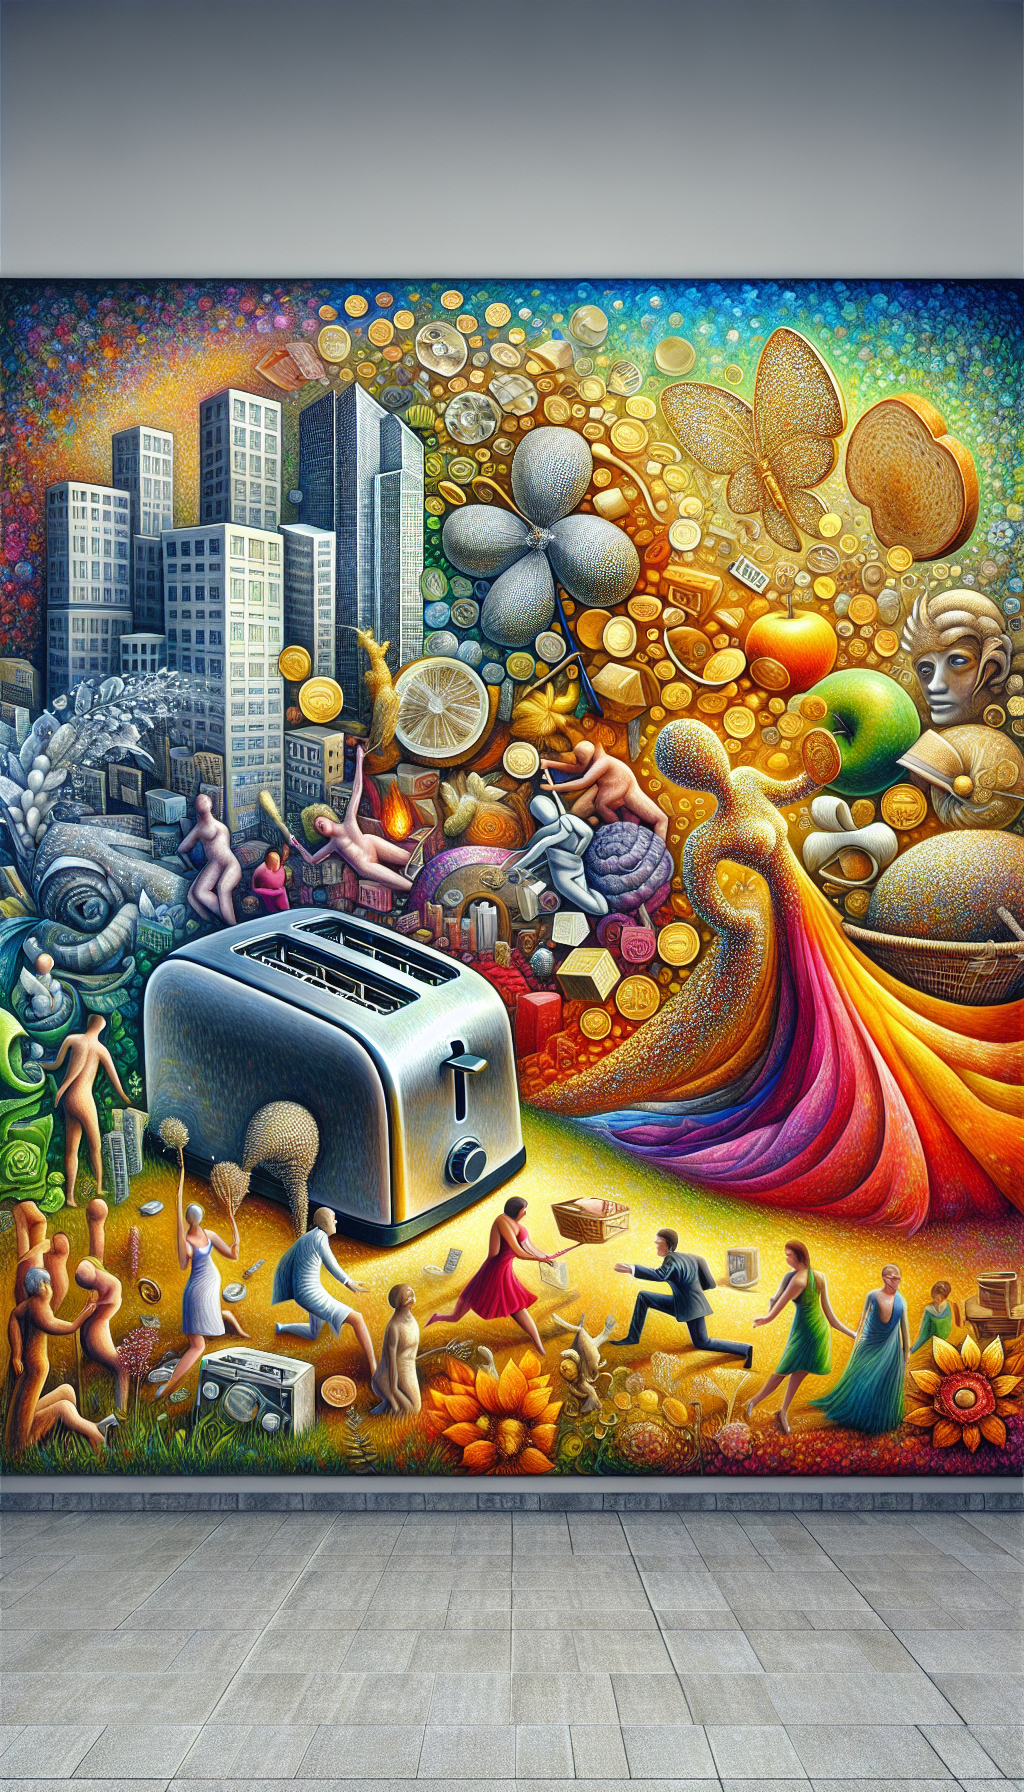 A vibrant tapestry unfurls across a canvas, where daily objects transform into whimsical art forms—a brushed chrome toaster blooms into a metallic flower, a skyscraper melts into a flowing gown—while individuals from different walks of life are intertwined with these artifacts, their expressions serene and uplifted. Golden coins fall like leaves, symbolizing art's enriching value in everyday existence.